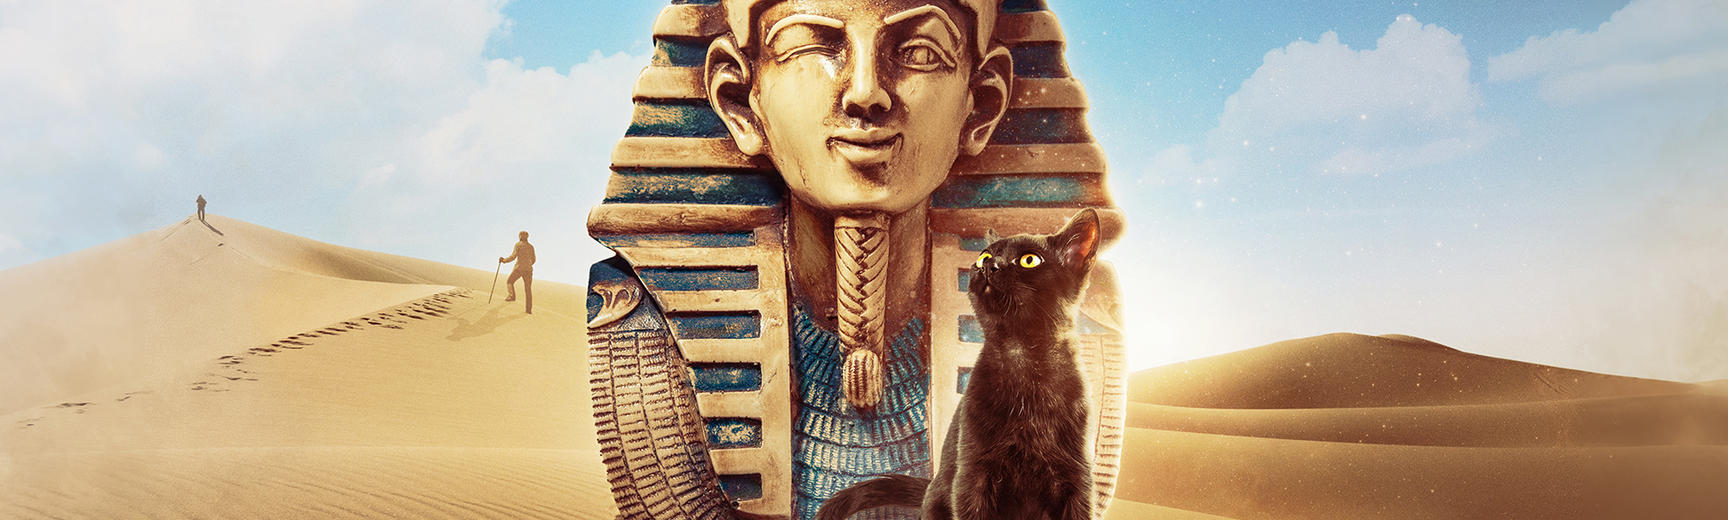 Illustration showing a winking gold bust of Tutnkhamun in the desert, with a black cat looking up at him